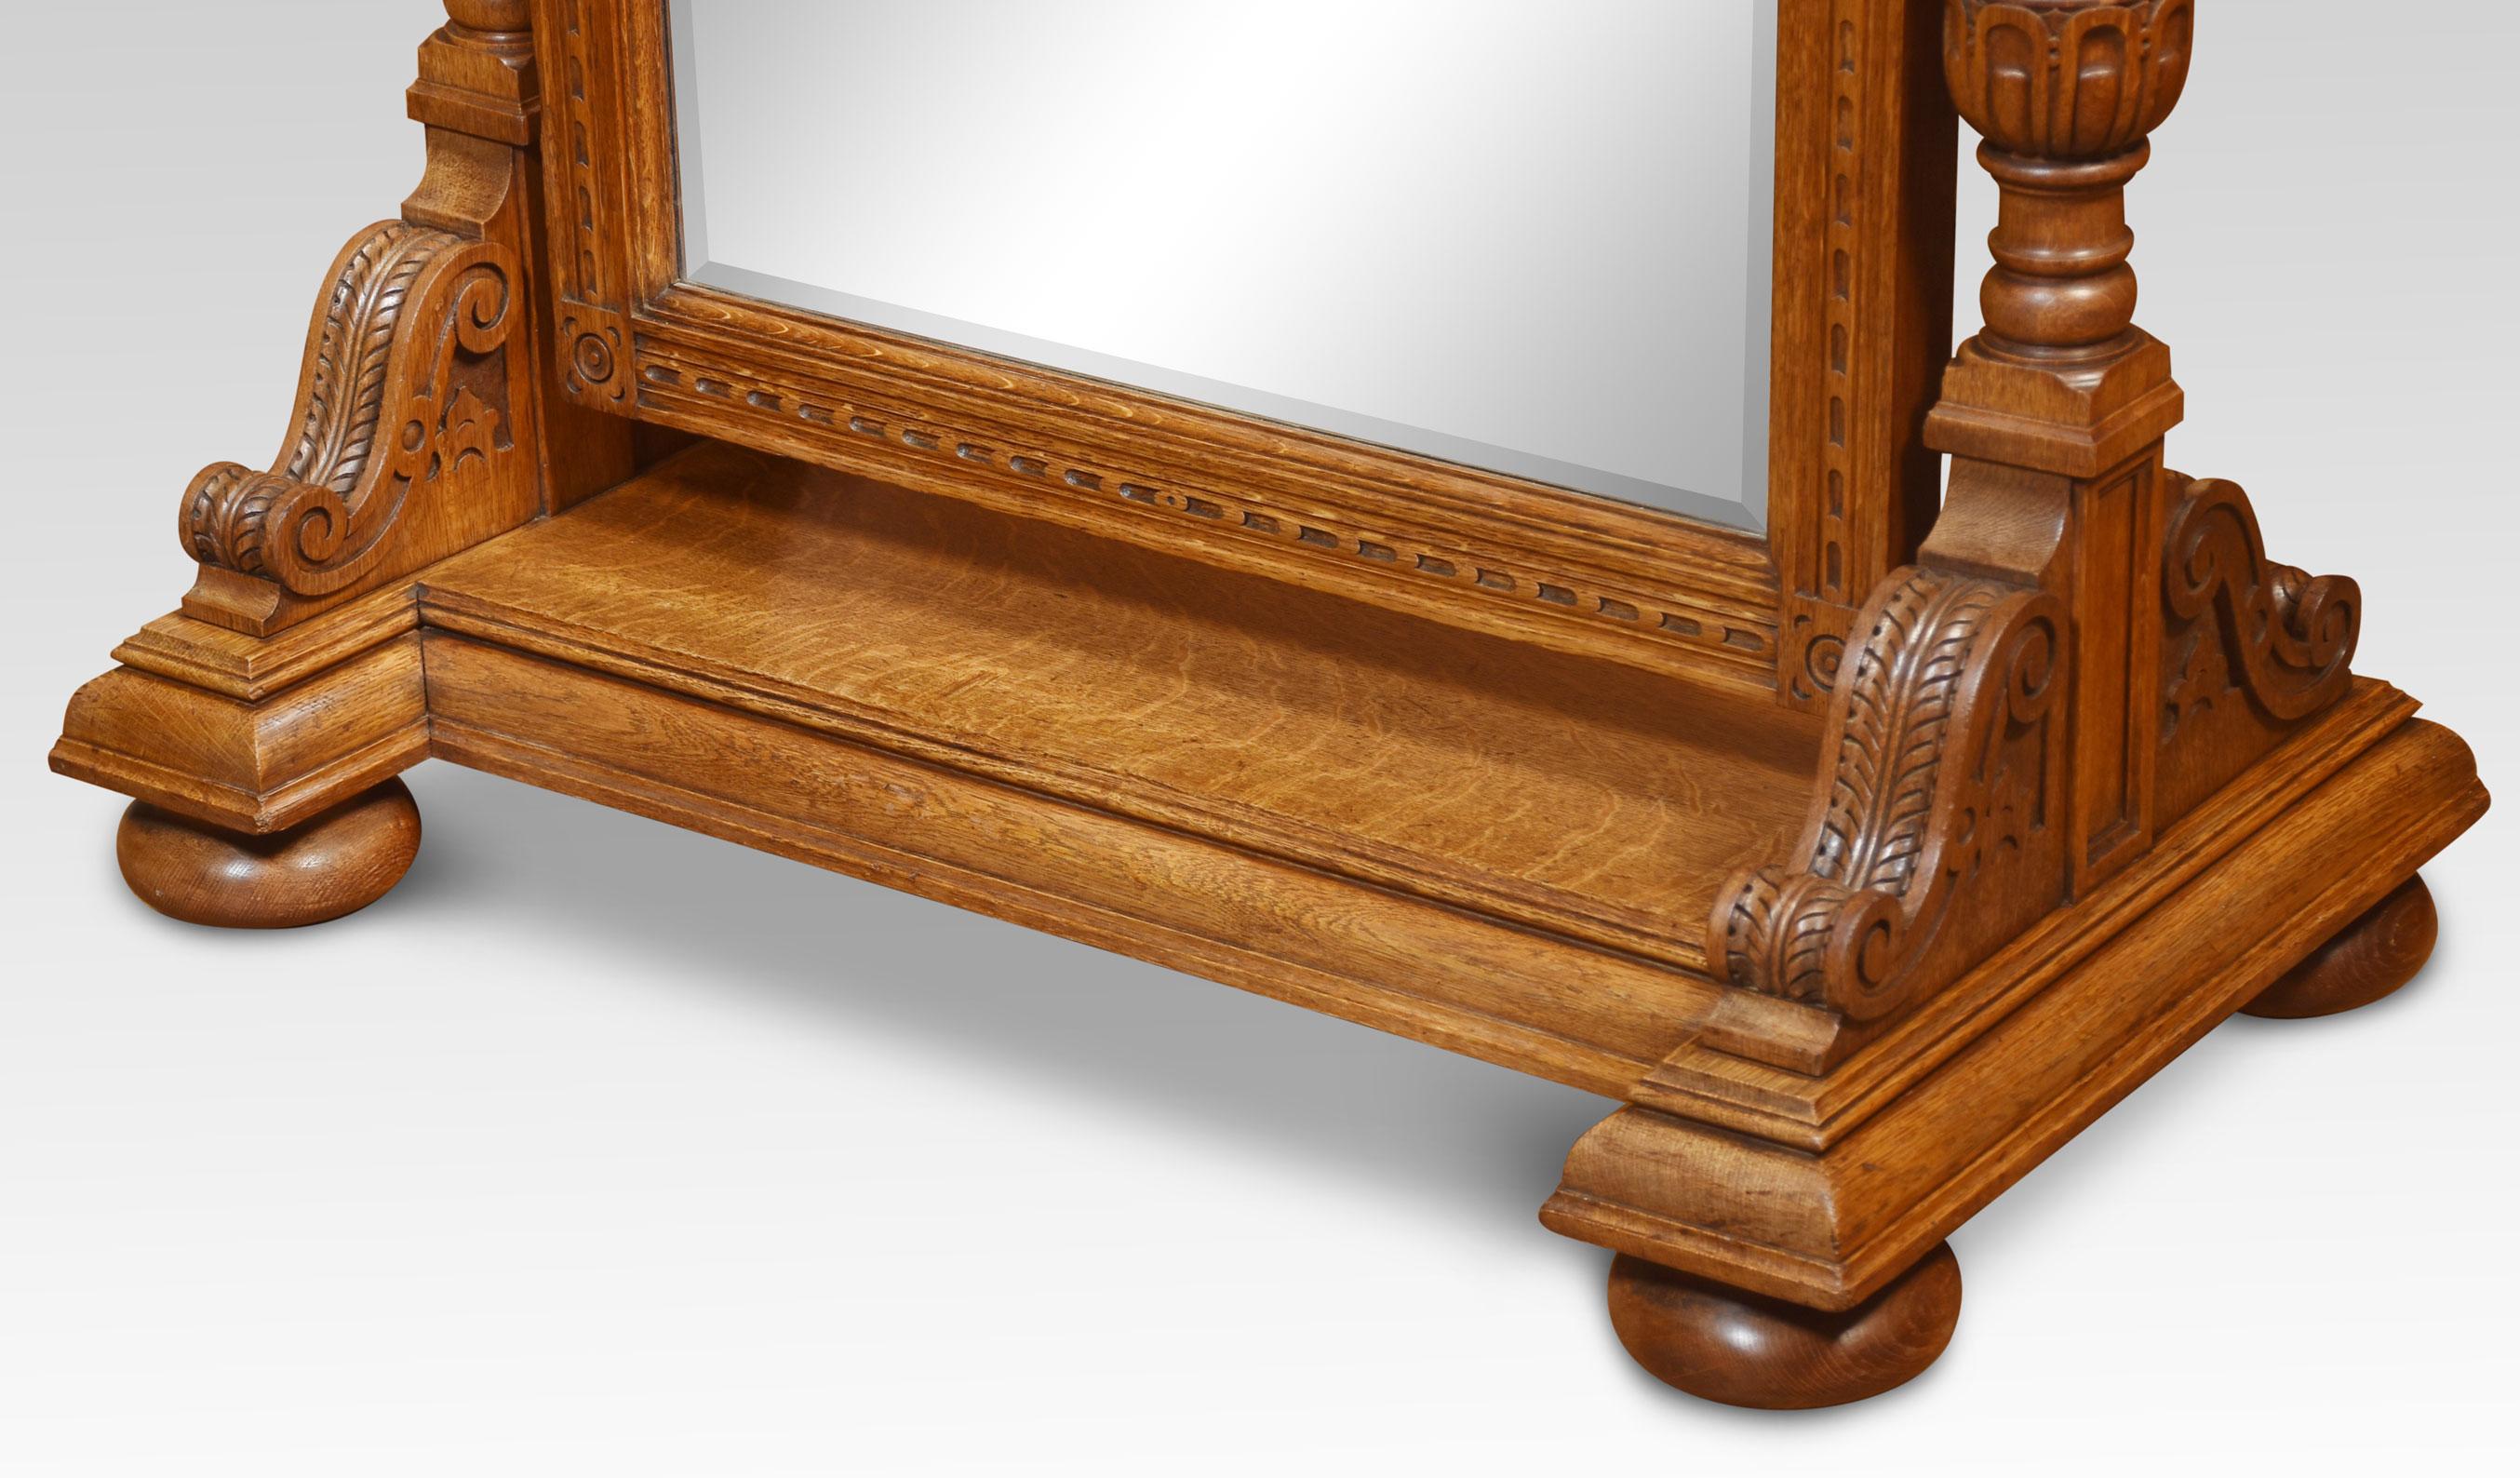 Large oak cheval dressing mirror having scrolling cornicing above an arched bevelled mirror plate and fluted frame, supported by a pair of architectural form columns over an inverted breakfront base with acanthus corbels and large compressed bun